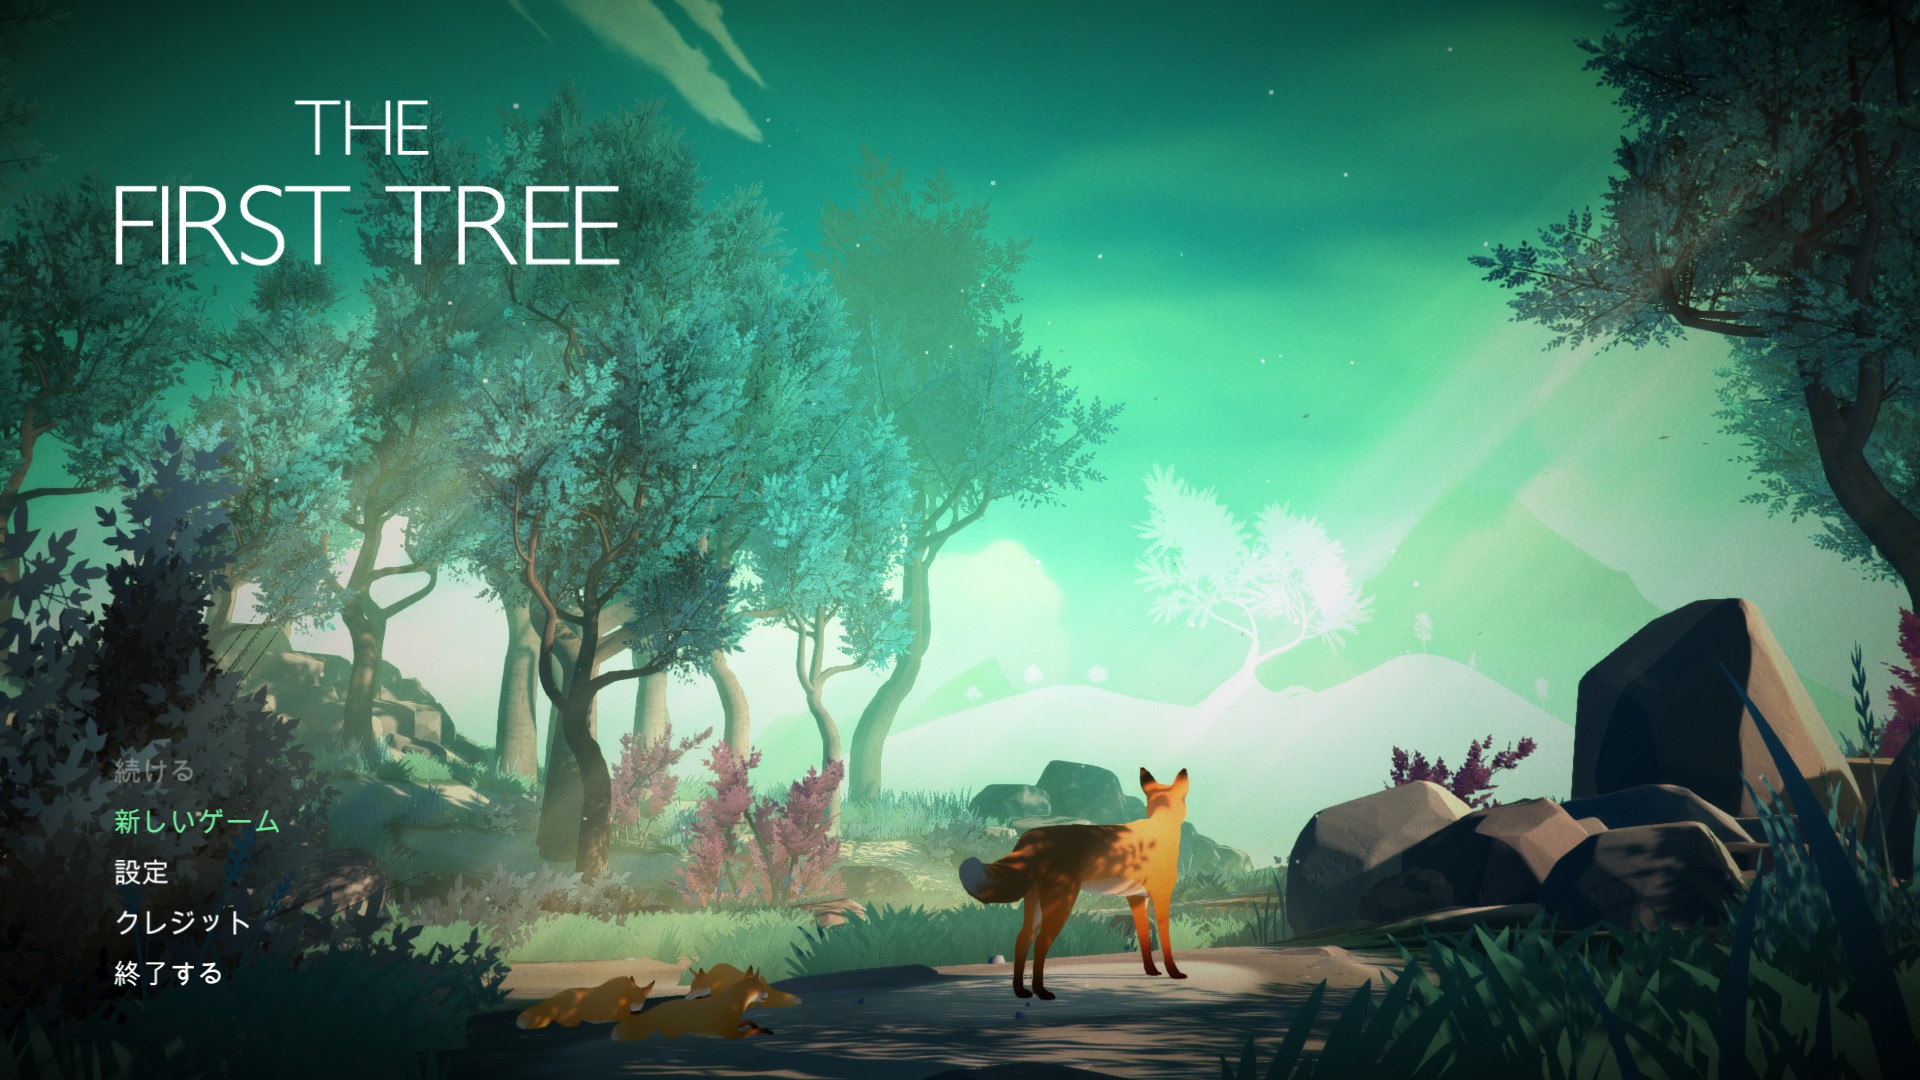 download free the first tree game